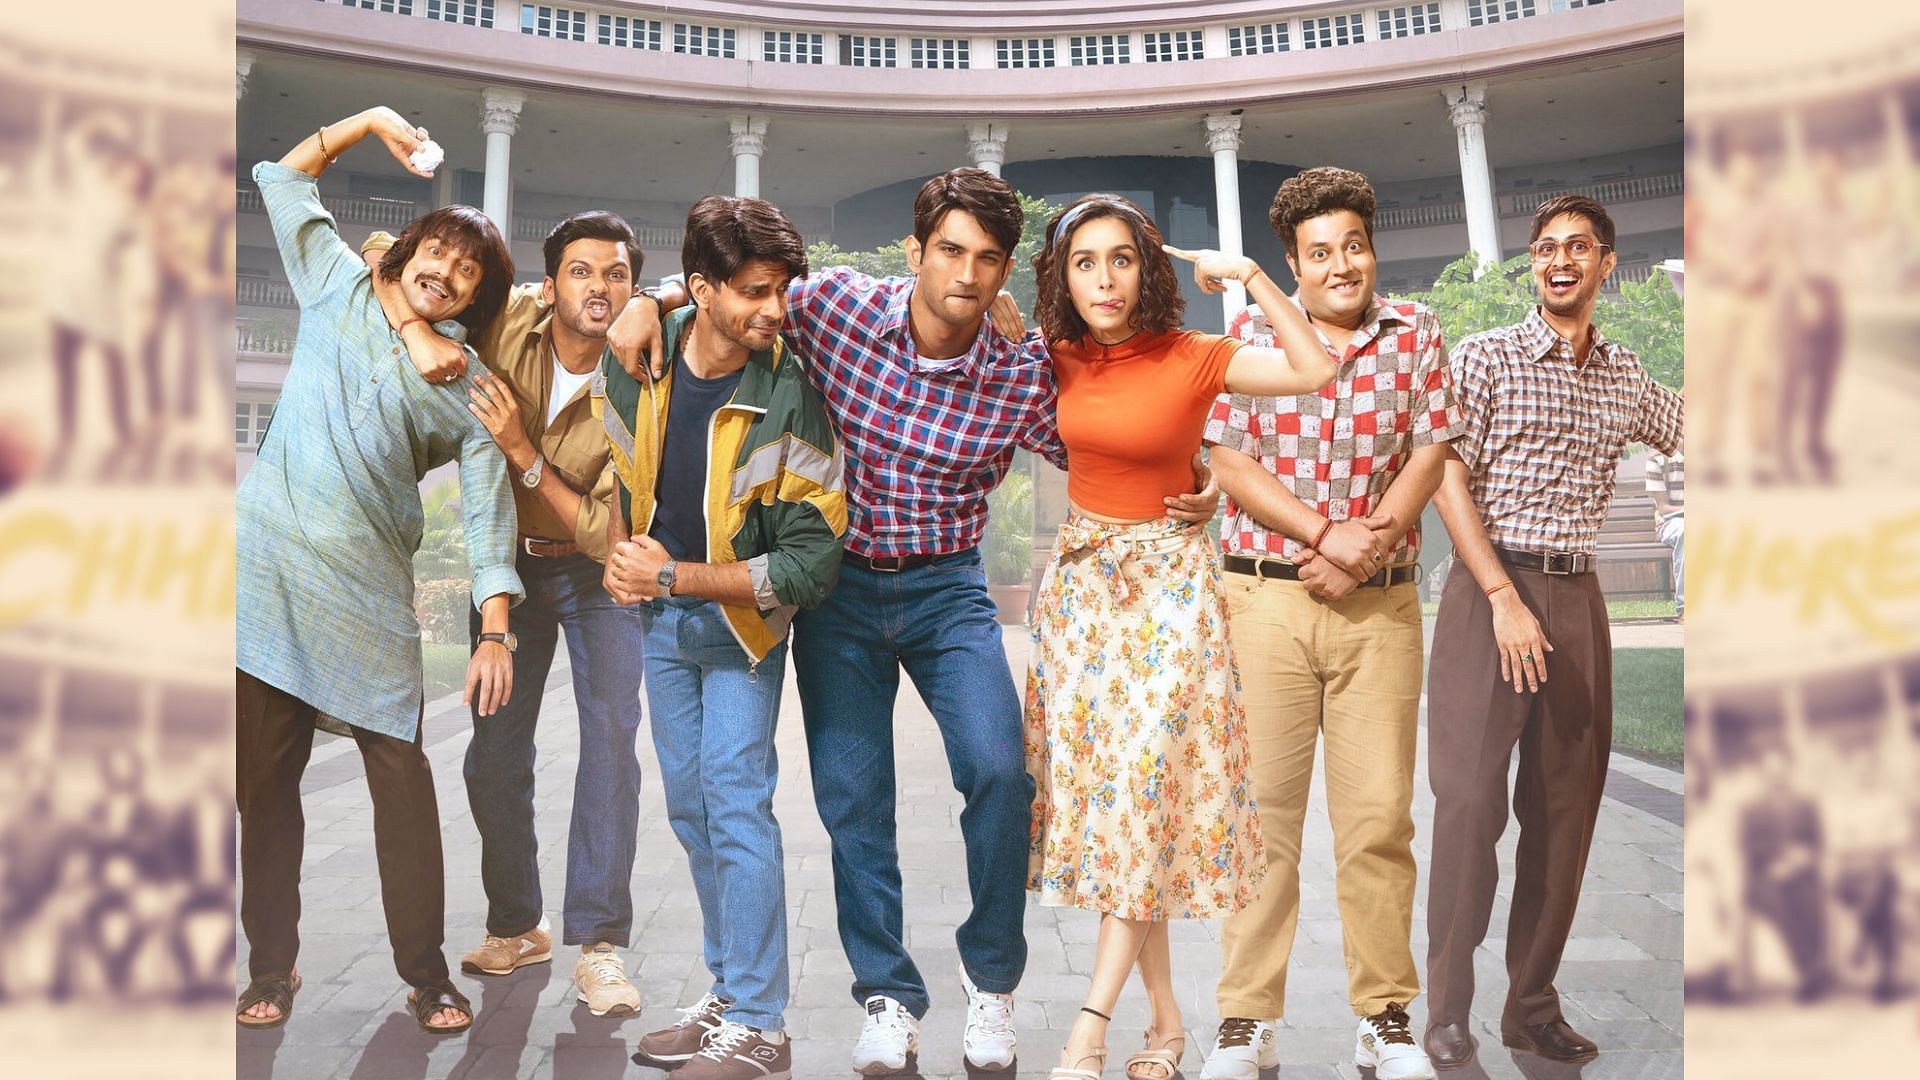 Sushant Singh Rajput, Shraddha Kapoor and Varun Sharma in a poster for <i>Chhichhore</i>.